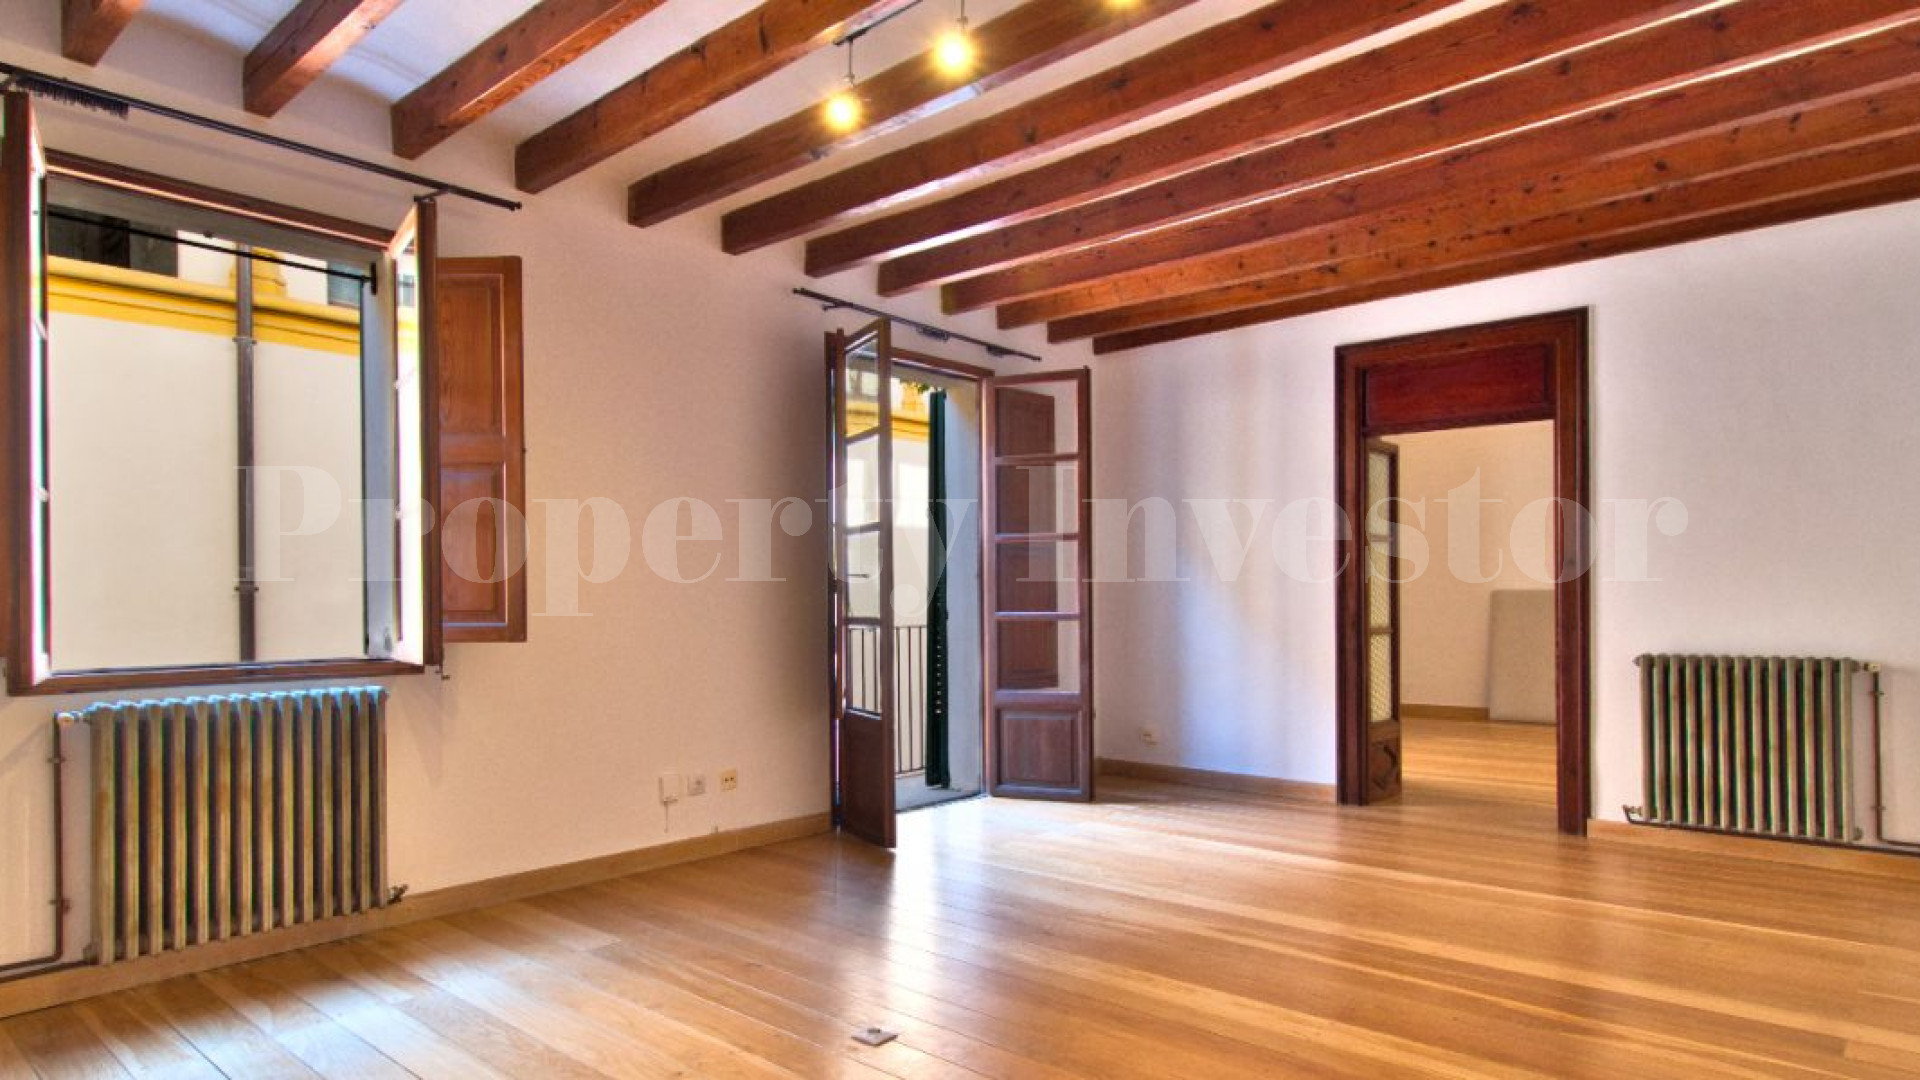 Charming 4 Bedroom Character Apartment in the Heart of Palma Old Town